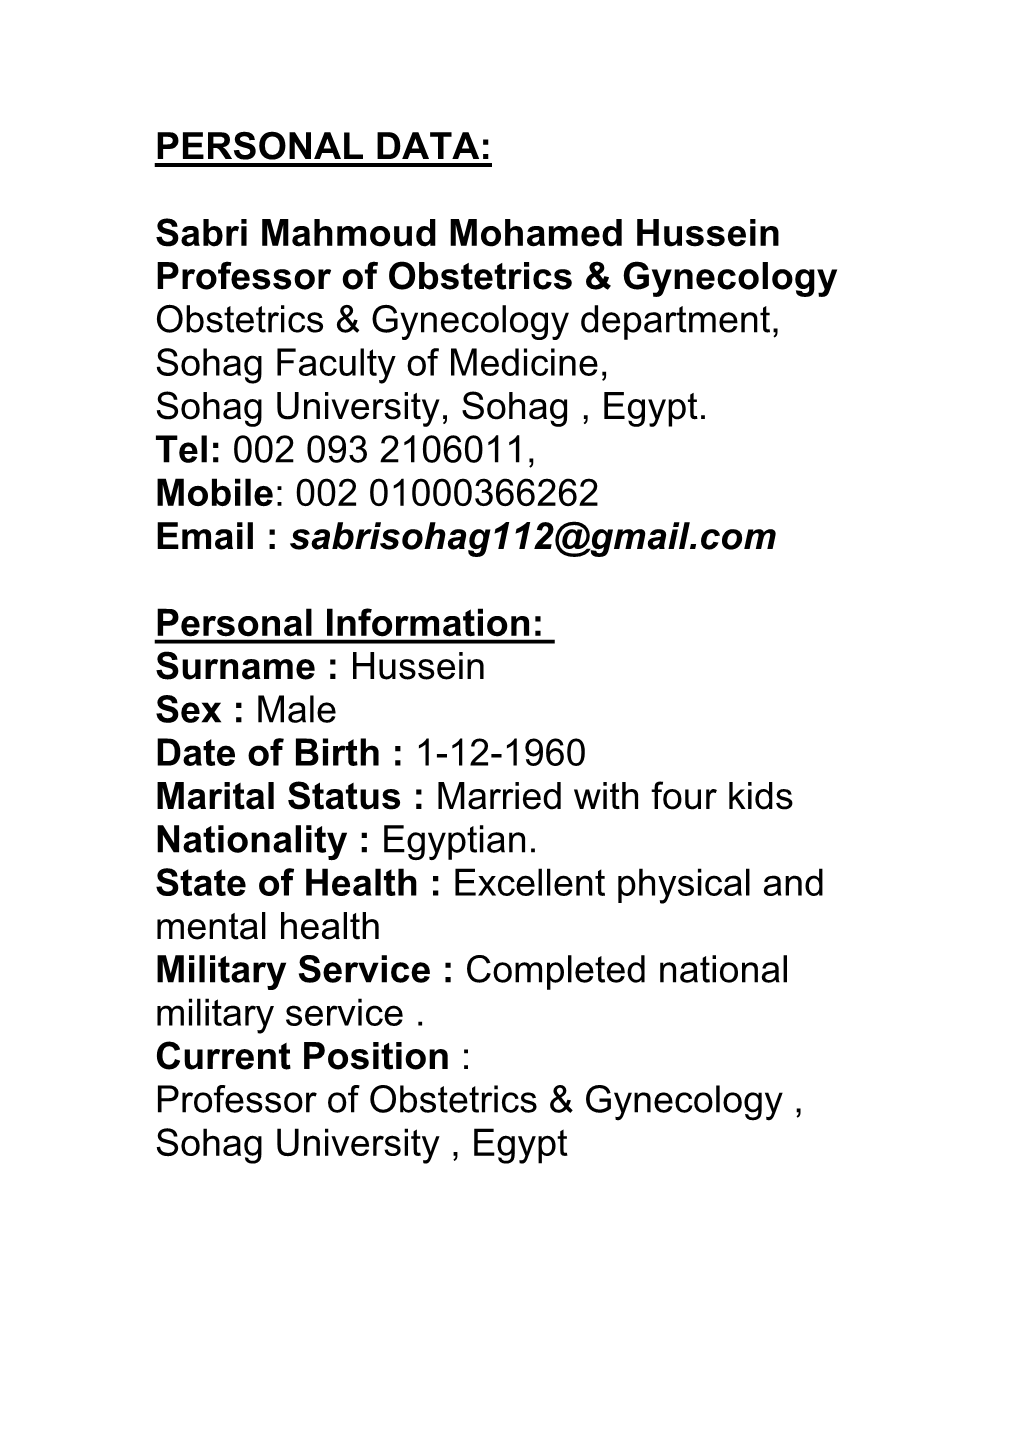 Professor of Obstetrics and Gynecology